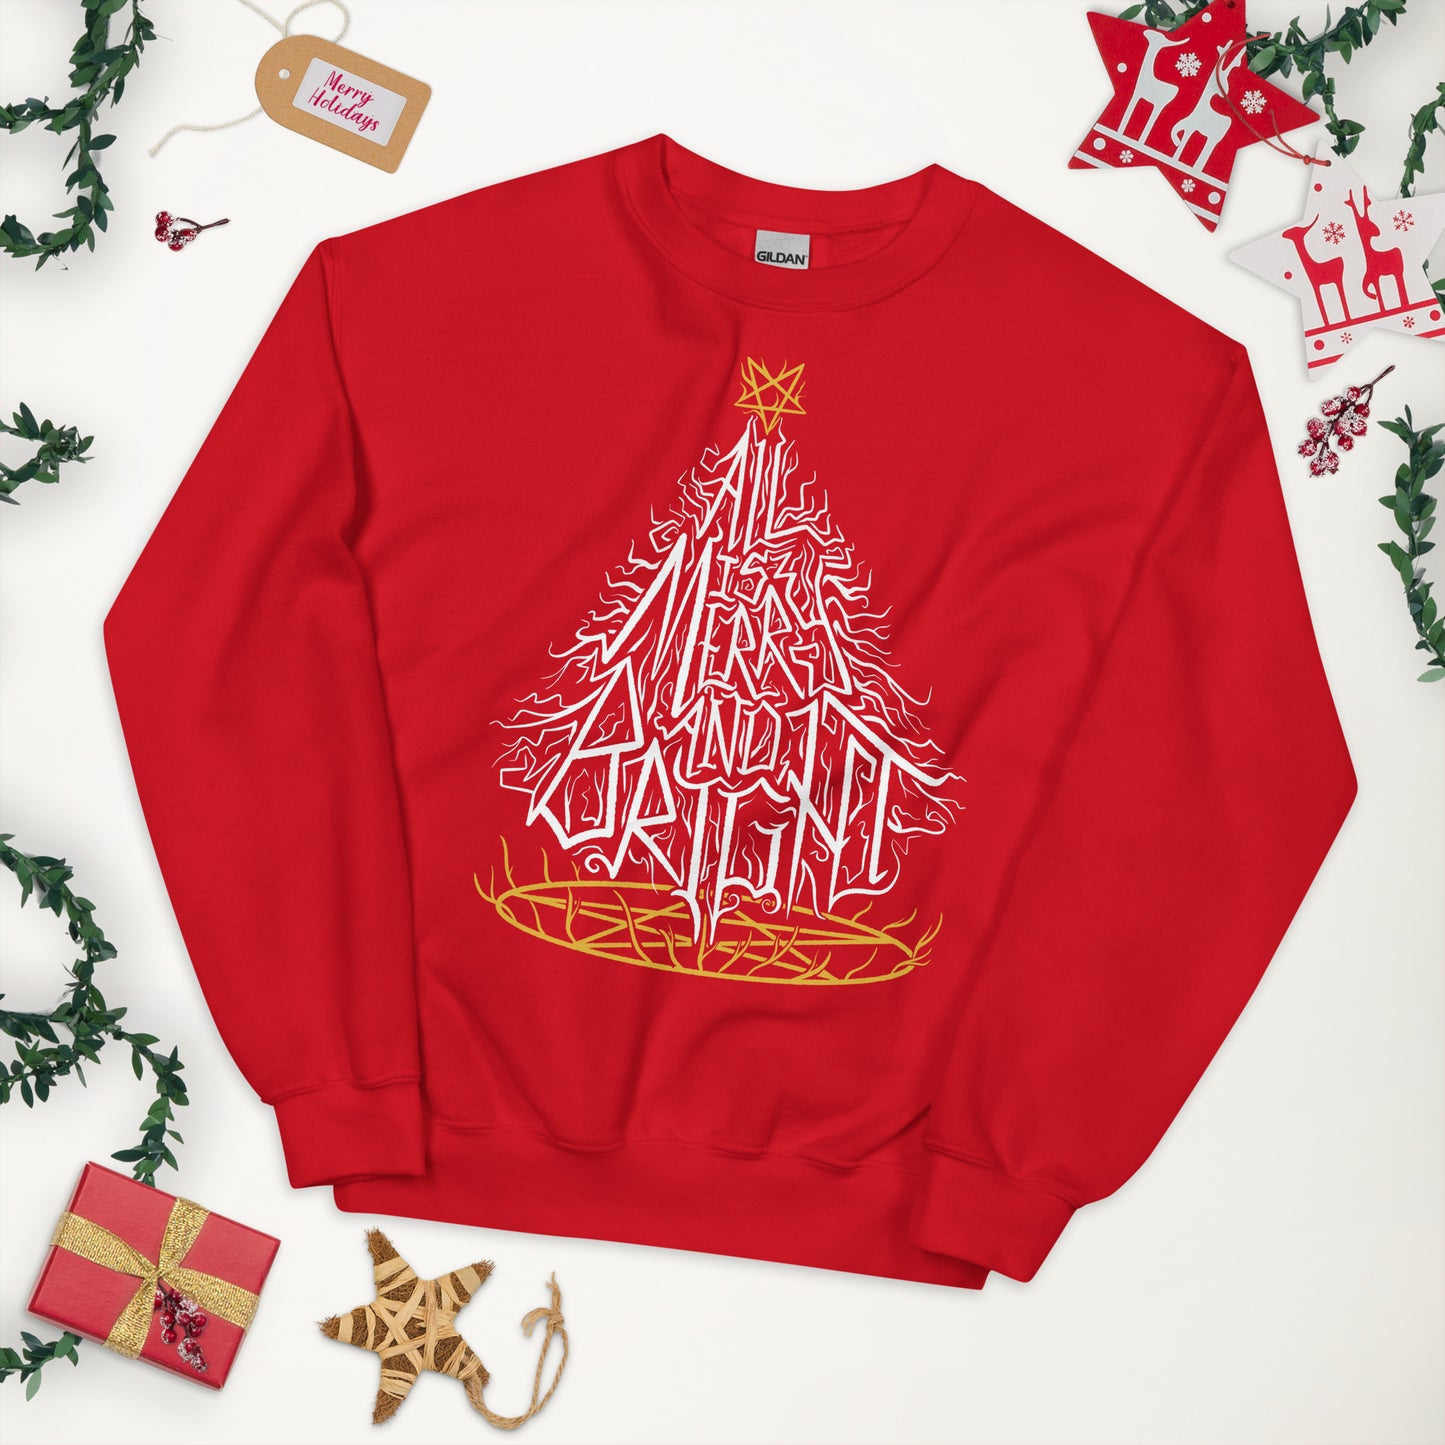 All is Merry and Bright - Heavy Metal Christmas Sweater